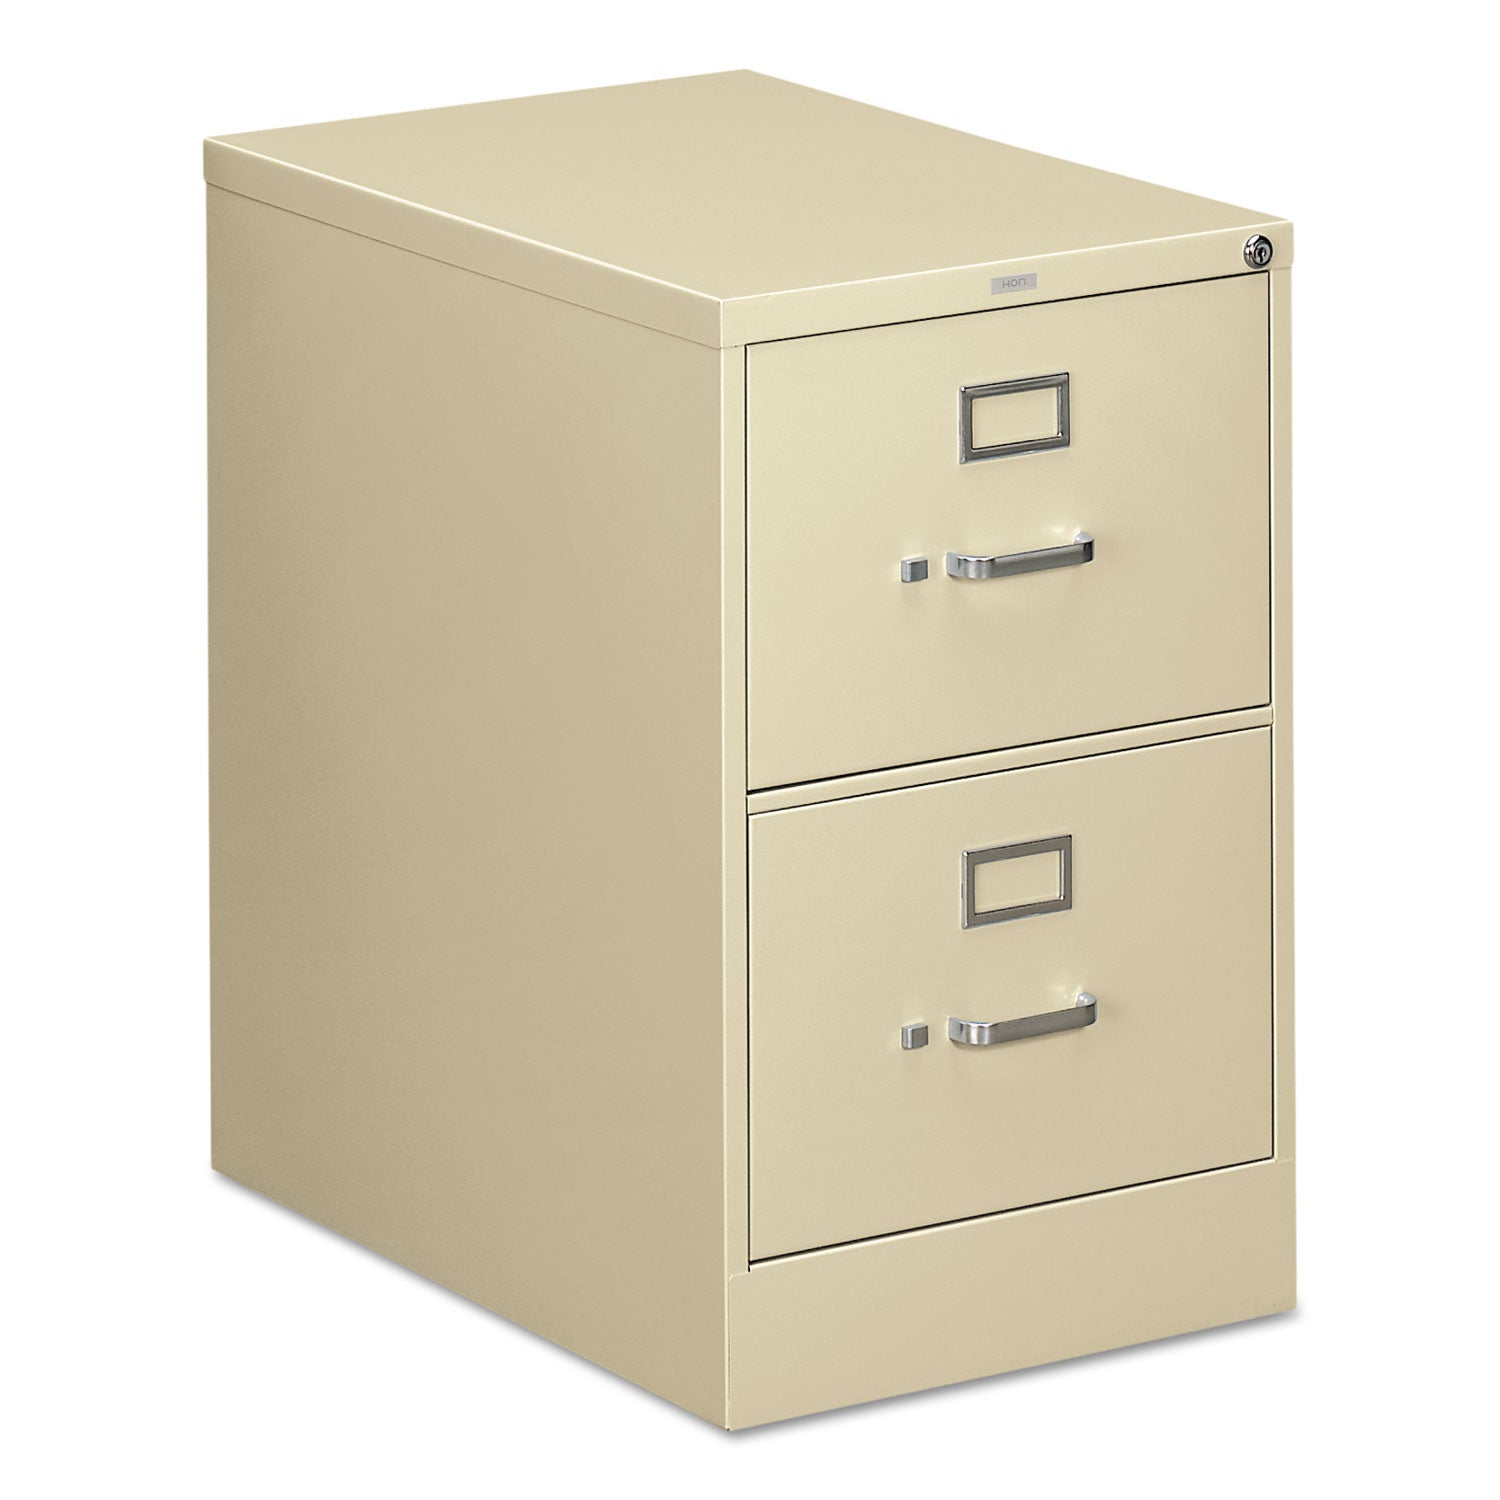 310 Series Vertical File, 2 Legal-Size File Drawers, Putty, 18.25" x 26.5" x 29 - 